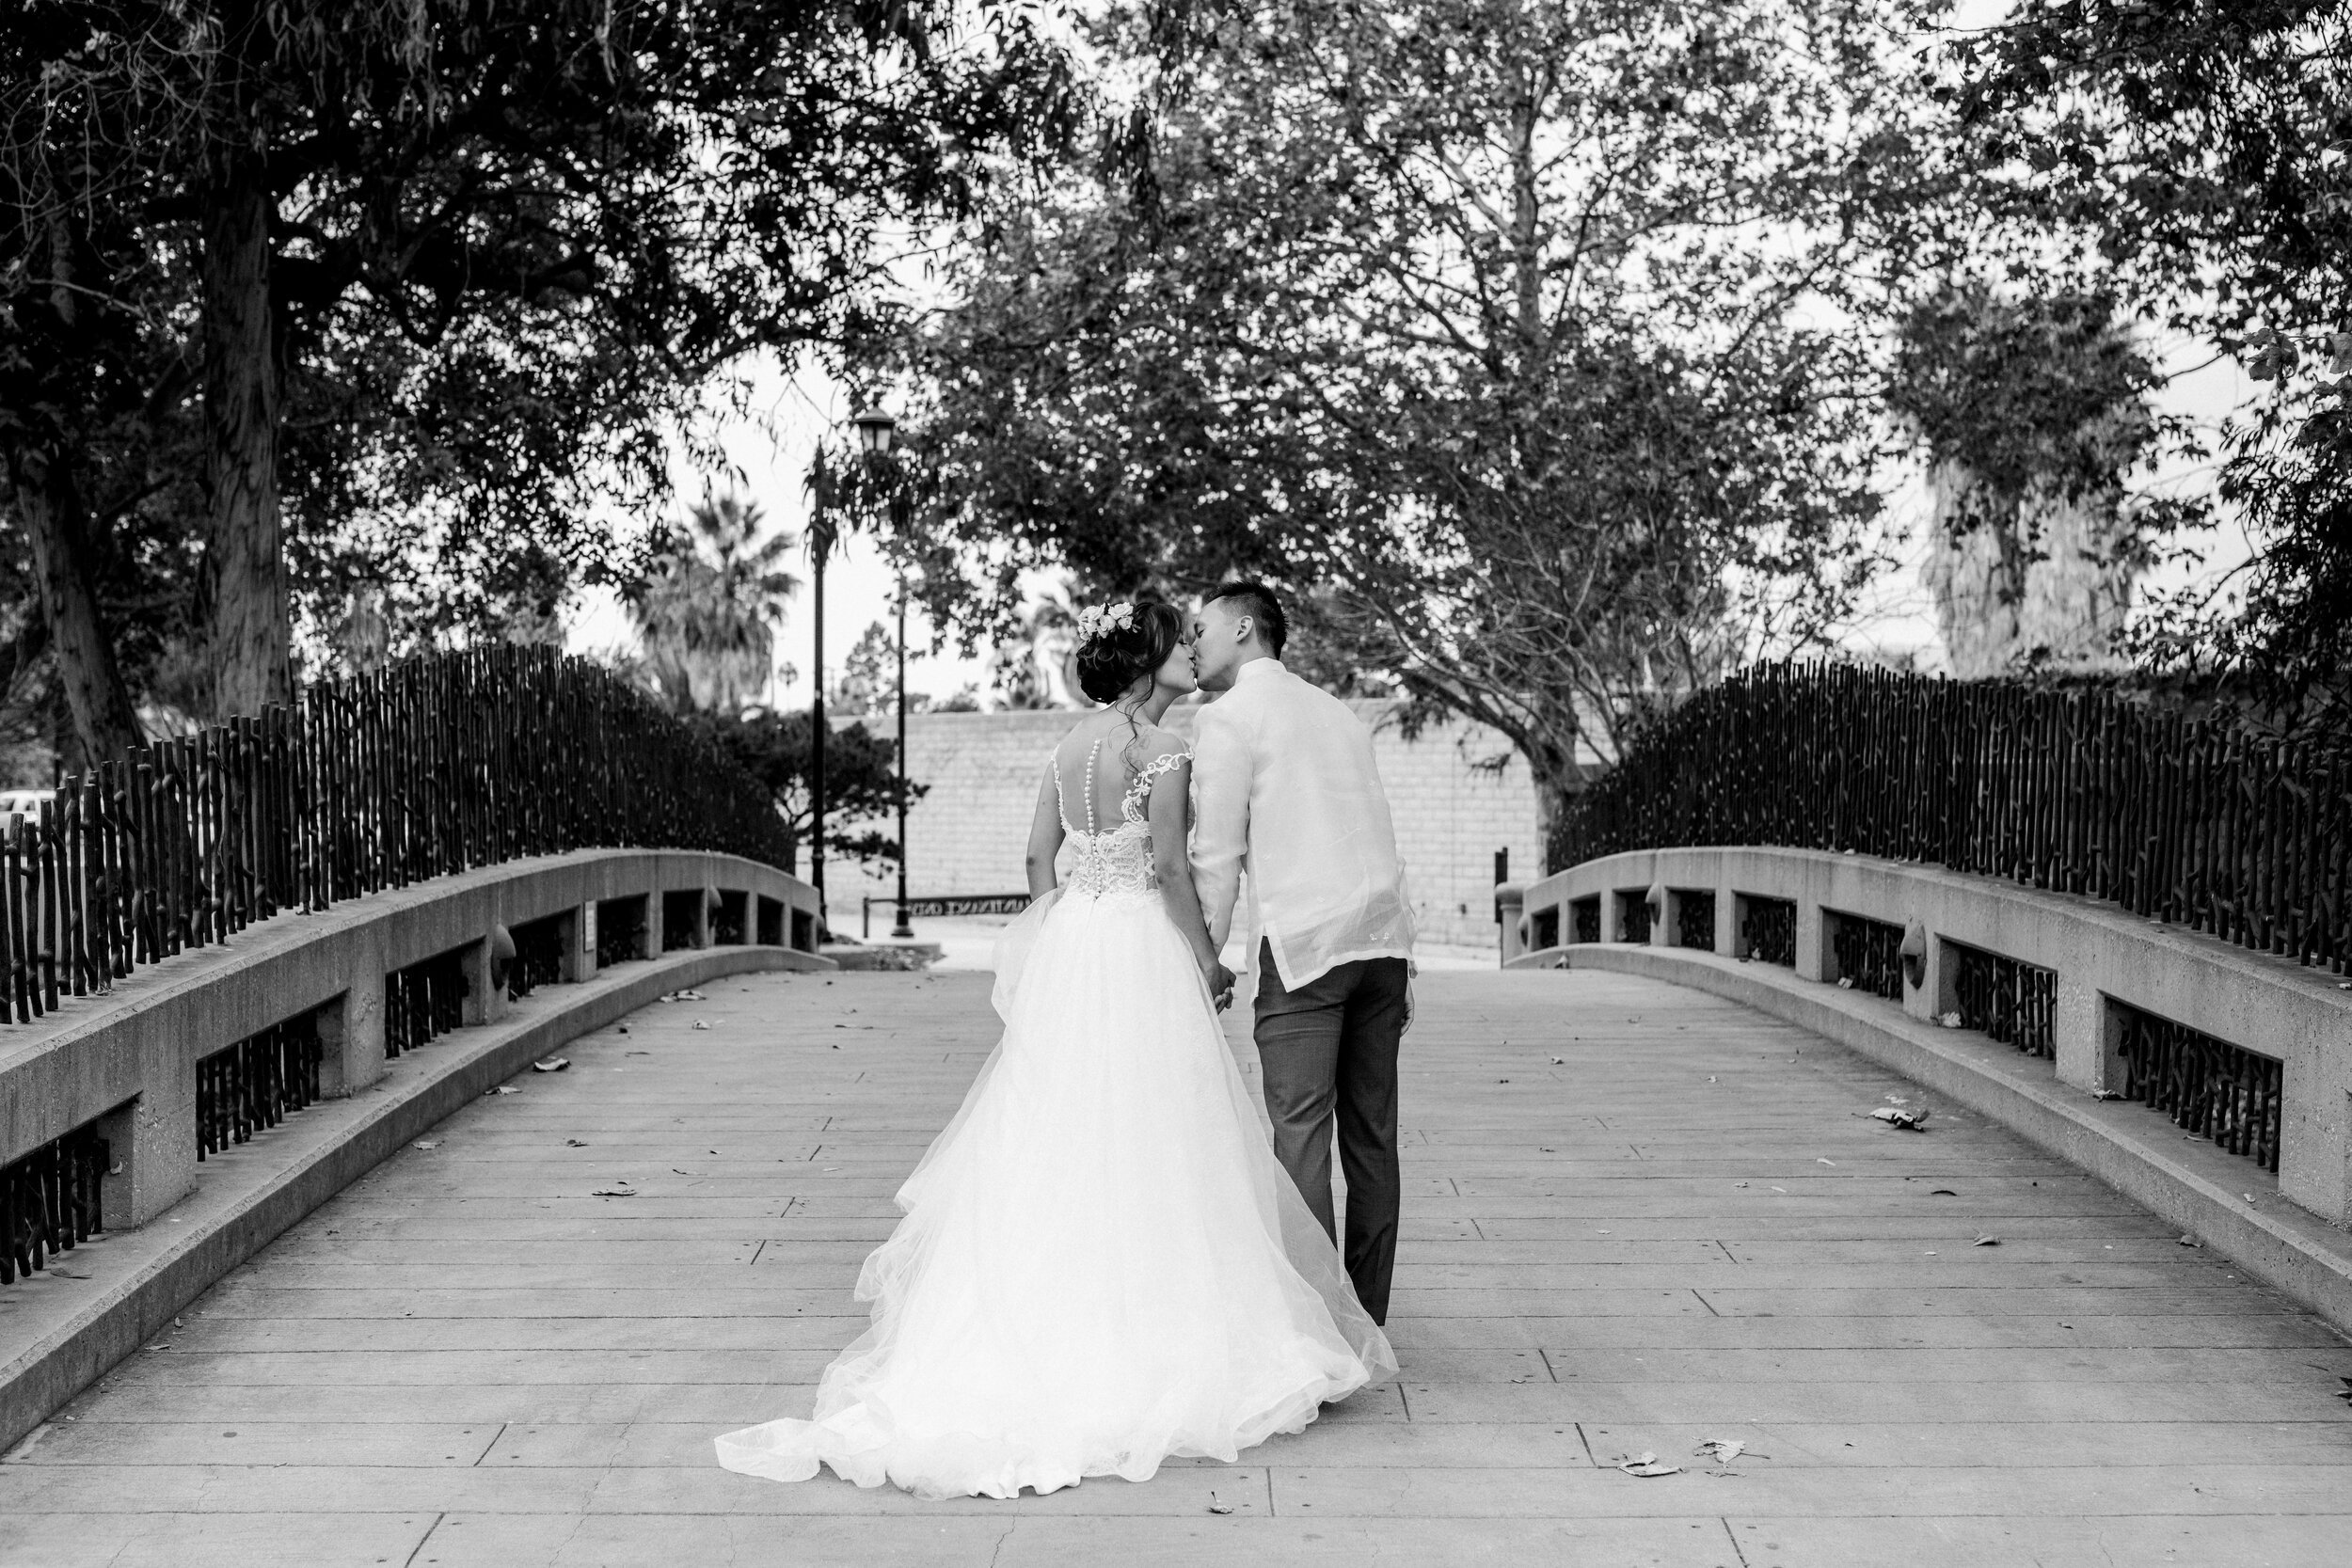 www.santabarbarawedding.com | Chase Palm Park | Anna Delores Photography | Bride and Groom Kiss on a Bridge in the Park